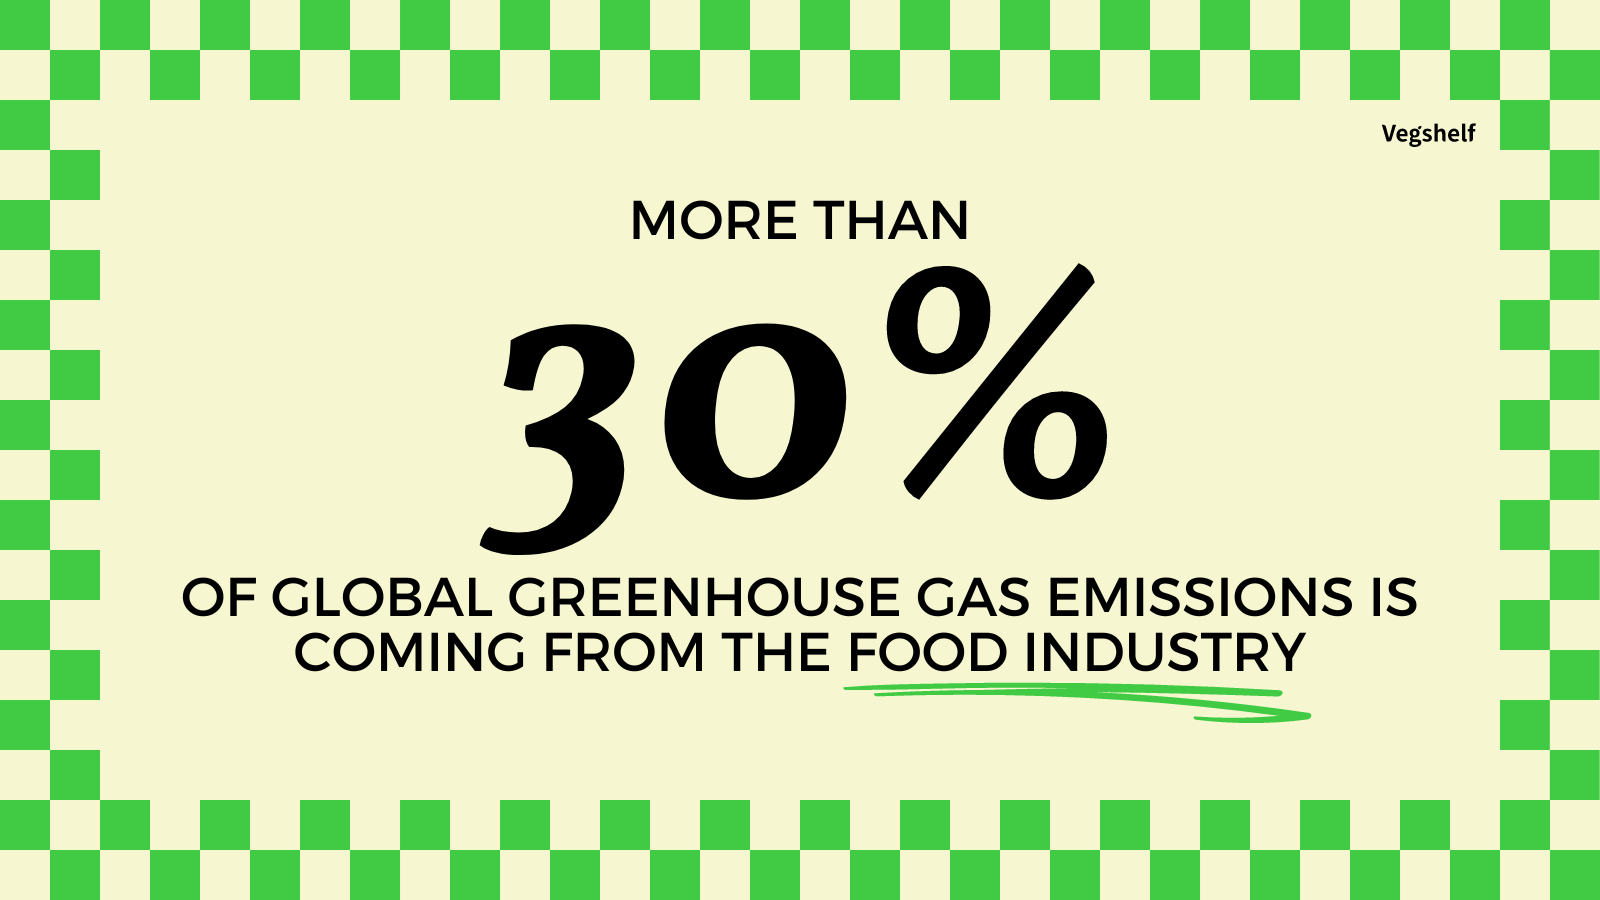 More than 30% of global greenhouse gas emissions is coming from the food industry